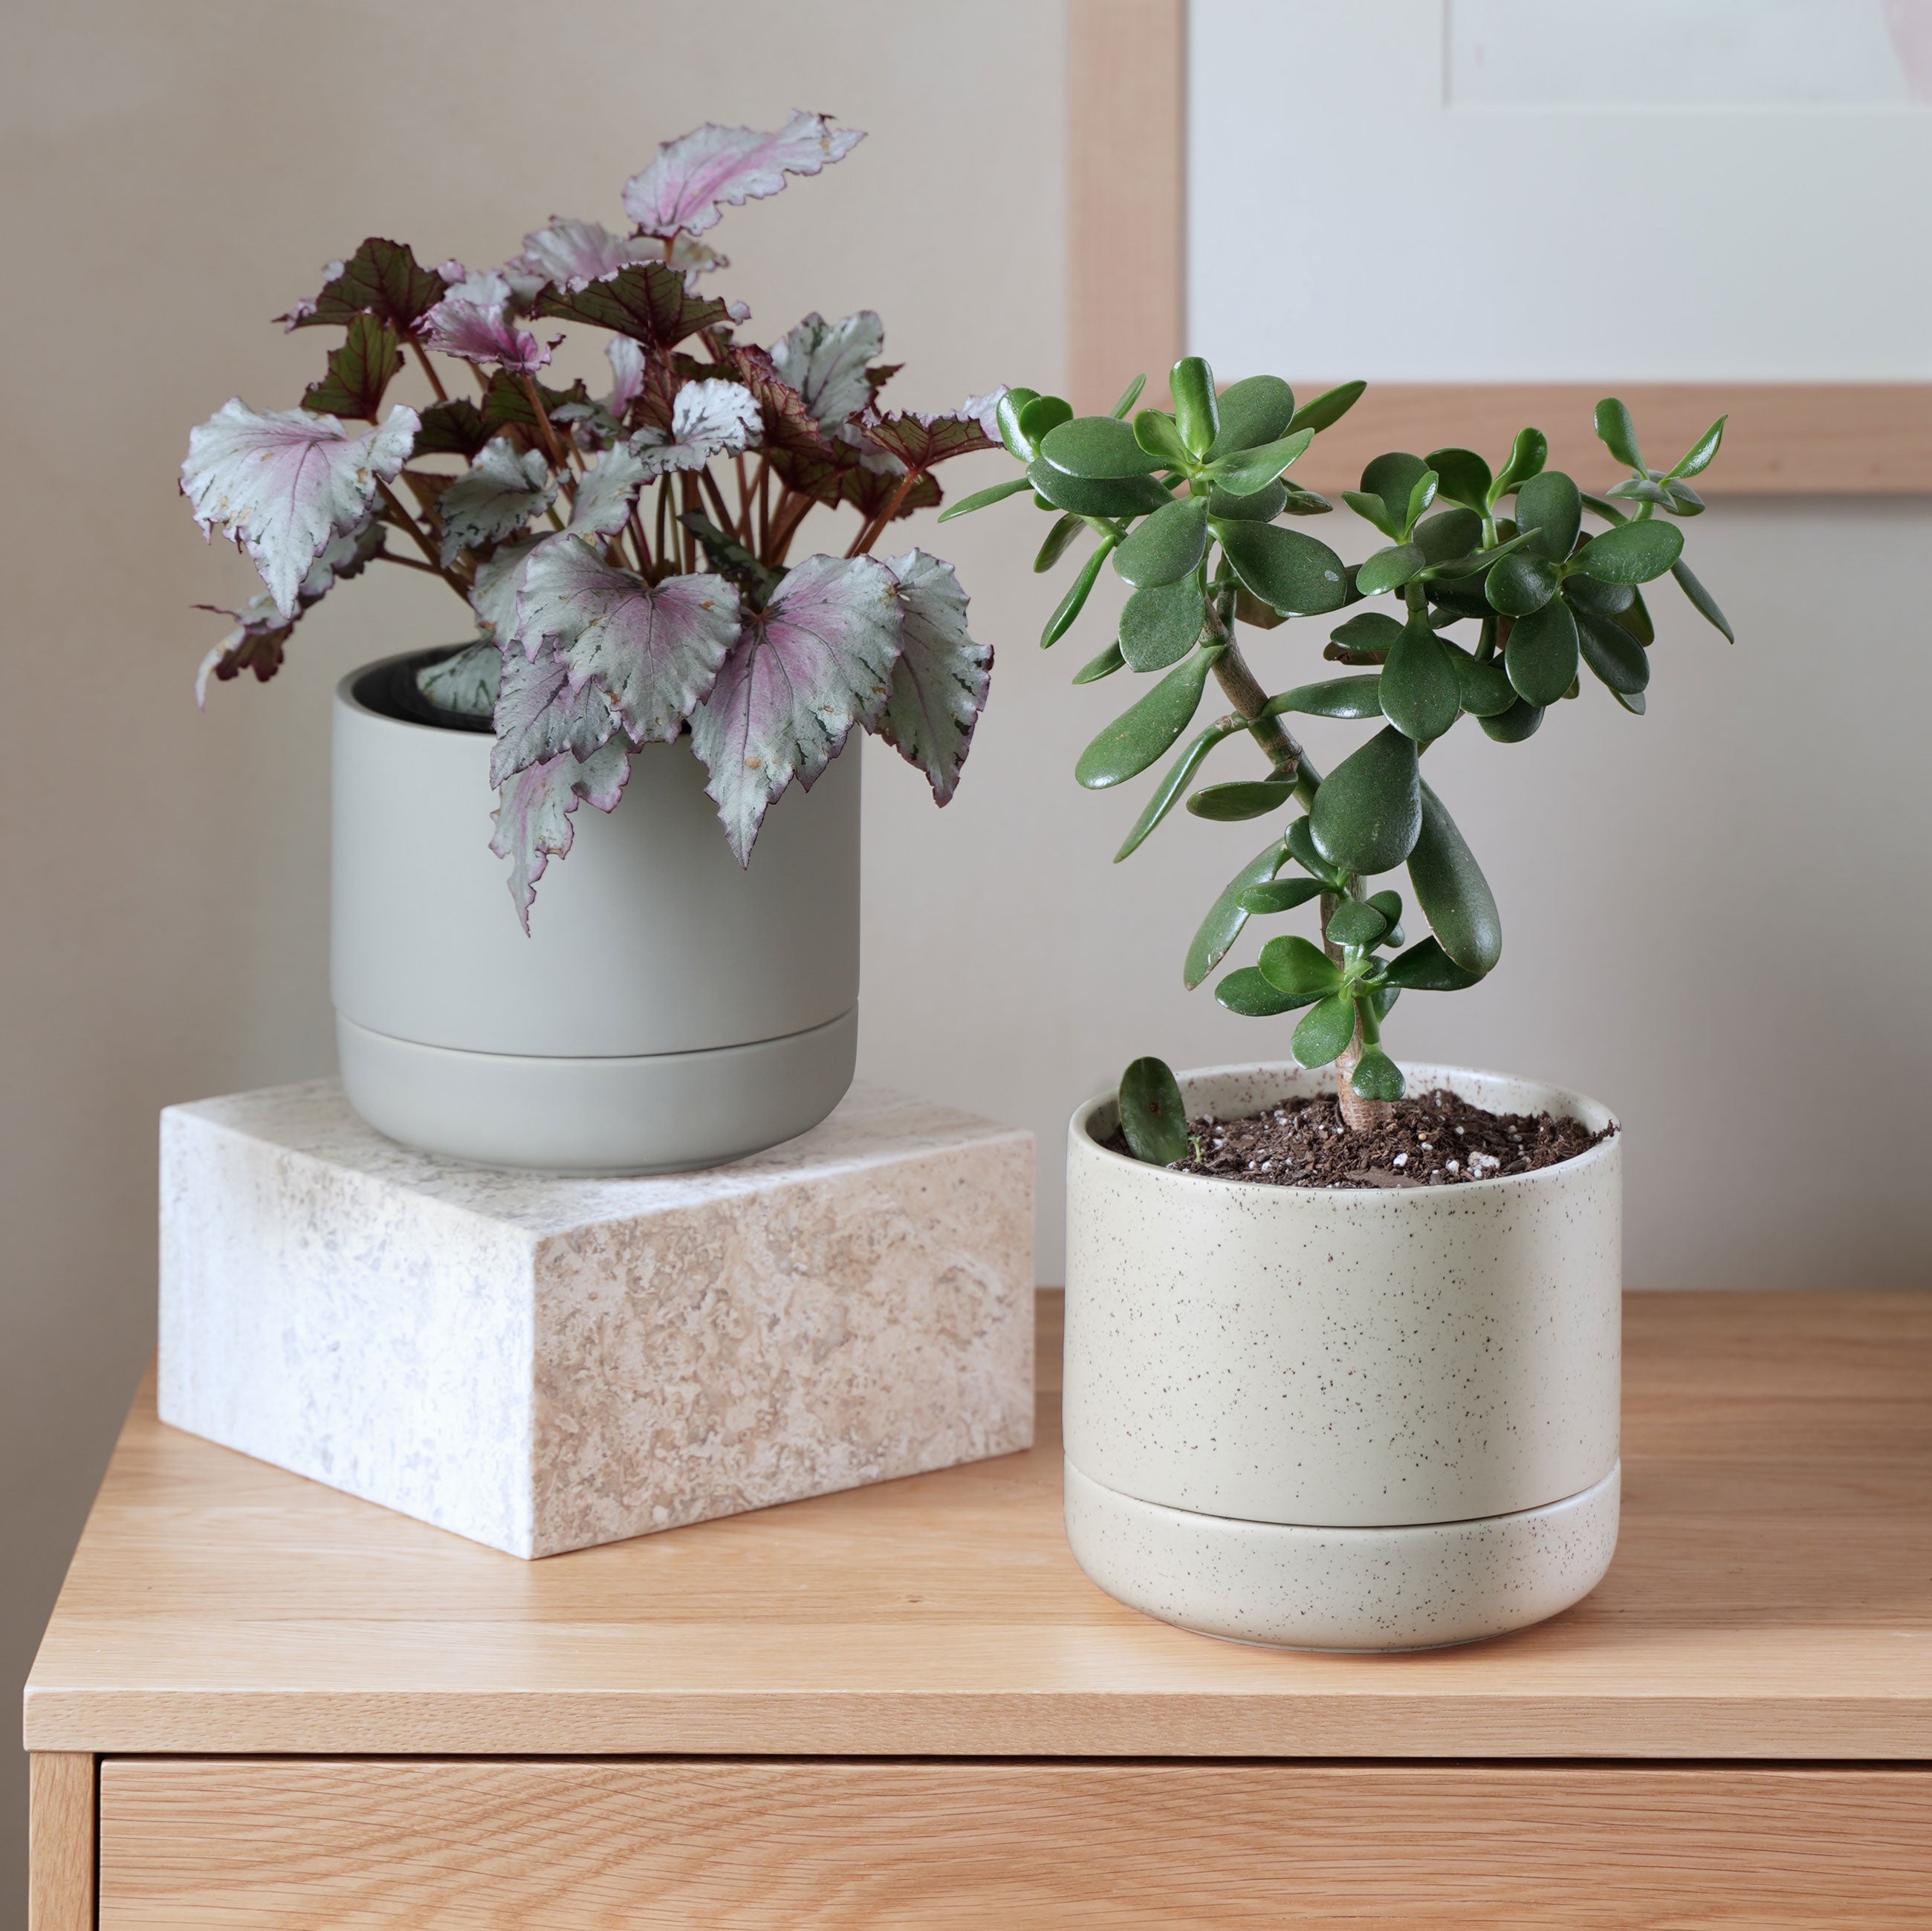 17 Cute Planters to Level up Your Apartment